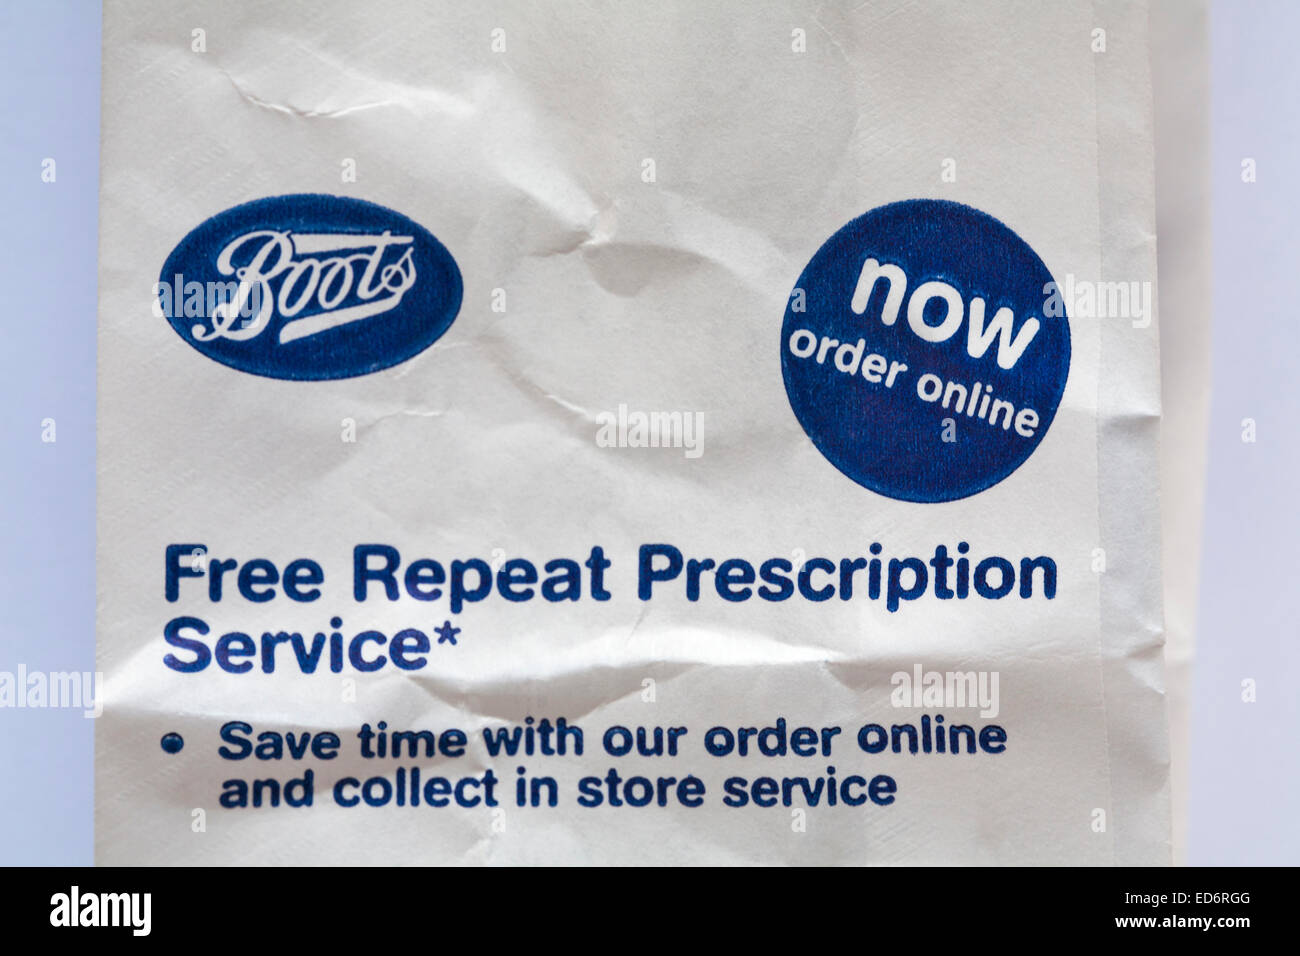 Boots Pharmacy prescription bag - free repeat prescription service save time with our order online and collect in store service Stock Photo